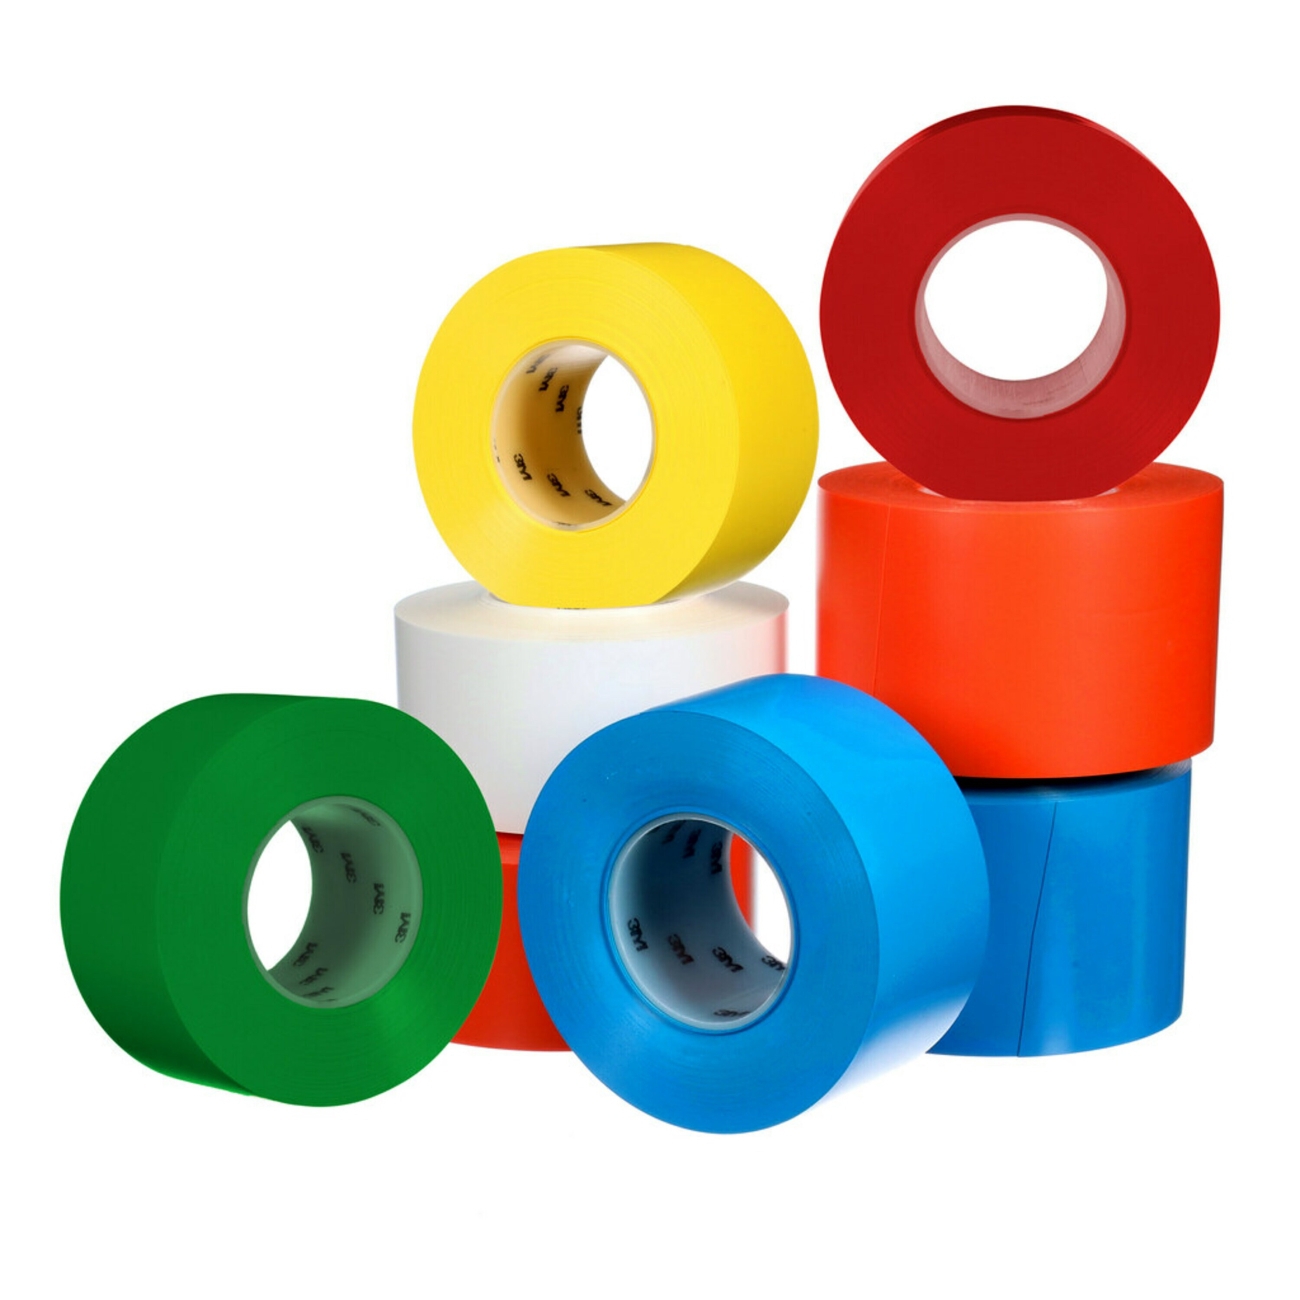 3M extra strong floor marking tape 971, blue, 101.6mm x 32.9m, 0.43mm